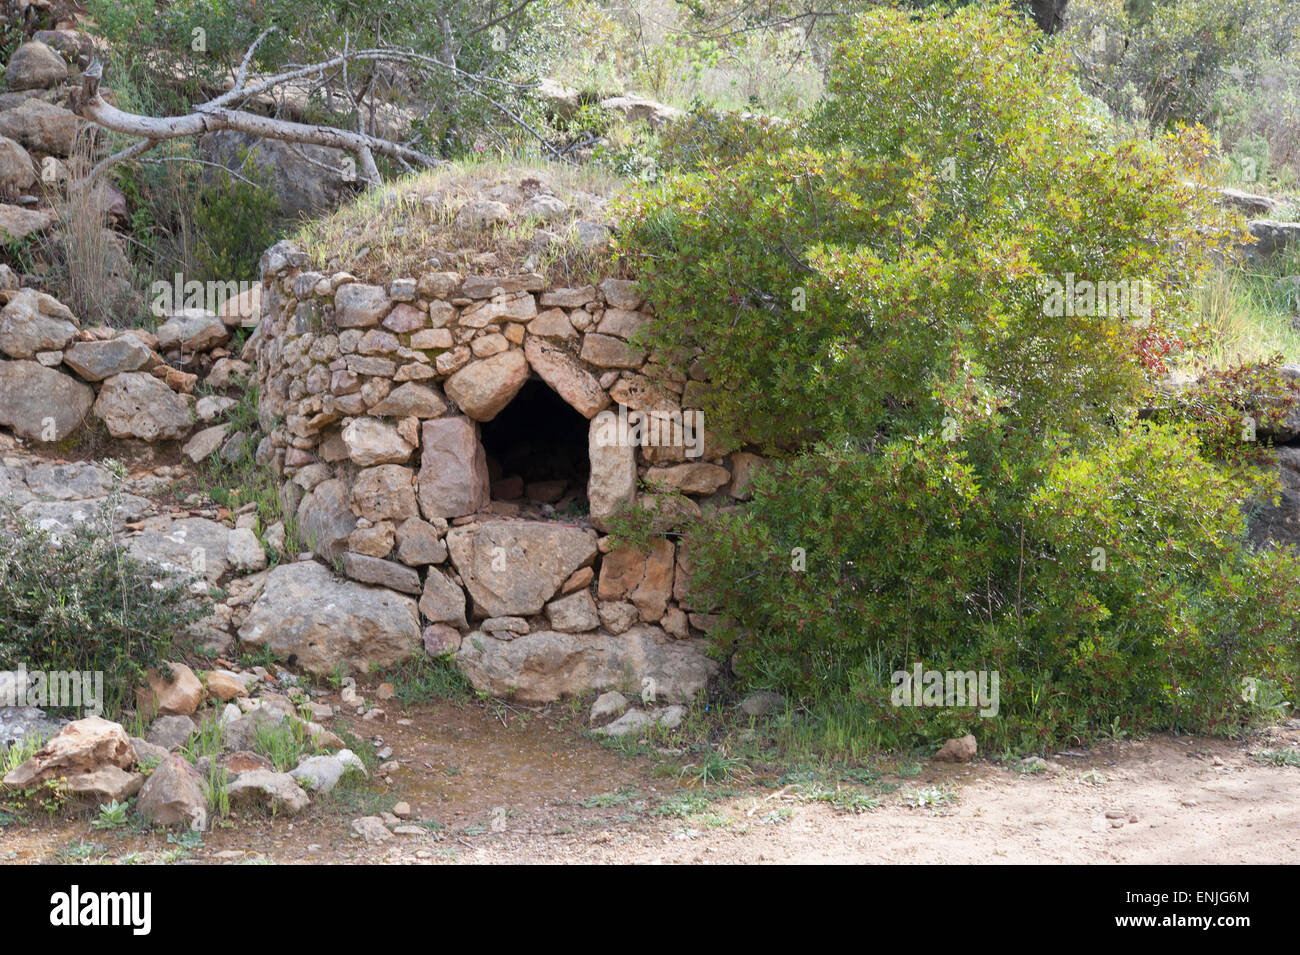 Ancient oven in a ruin near Paderne, Portugal. Stock Photo